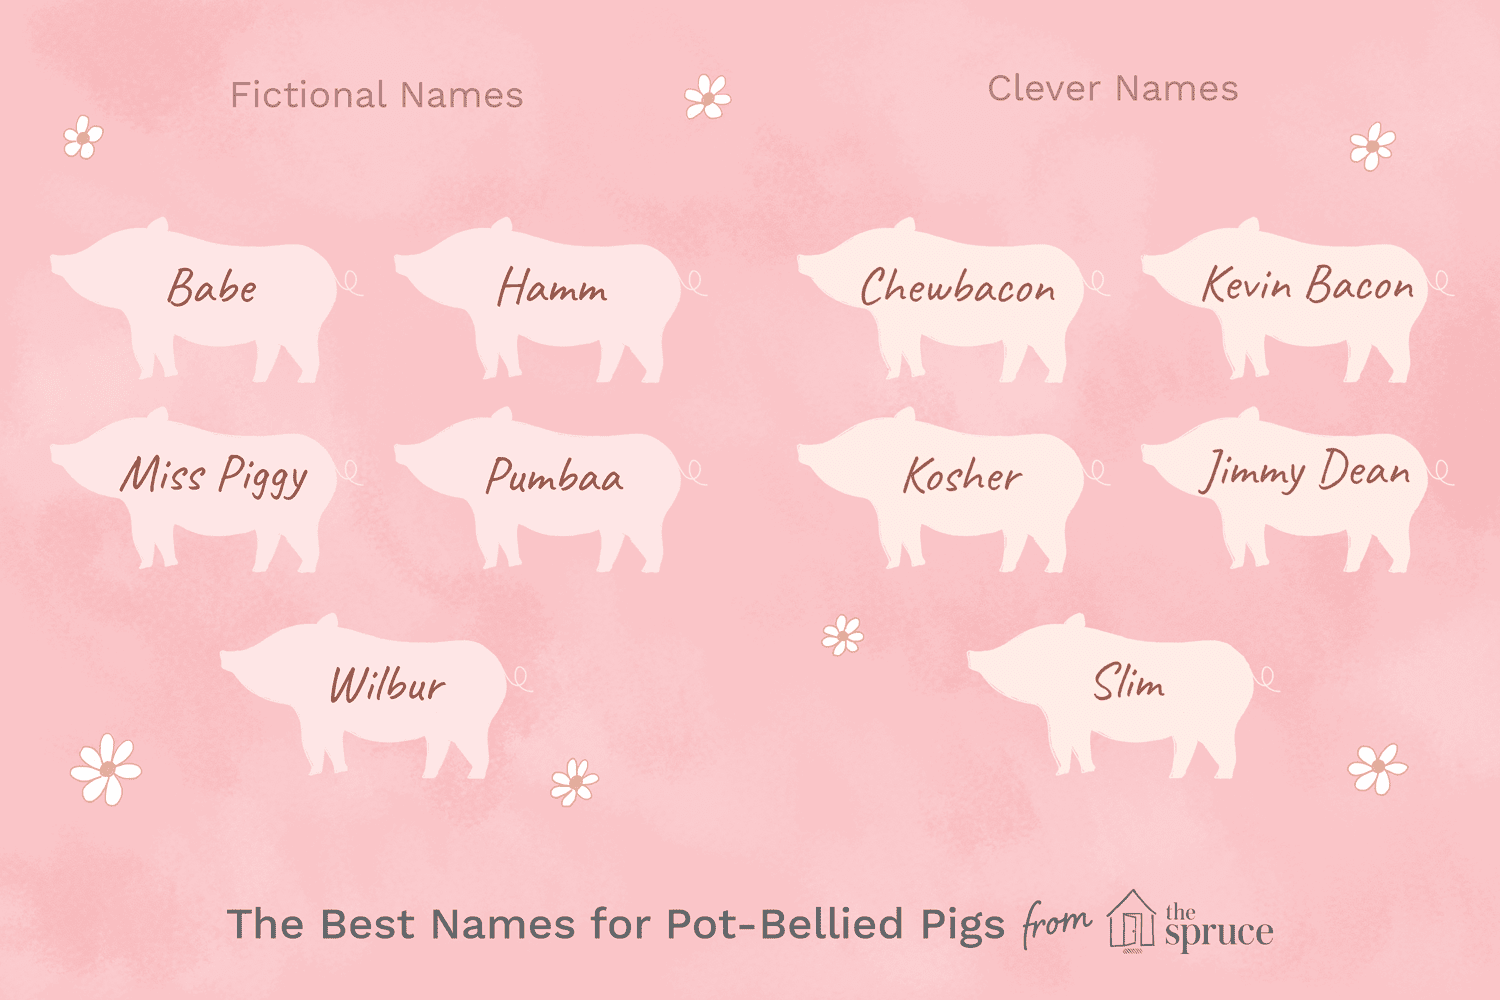 What's another name for a piglet?